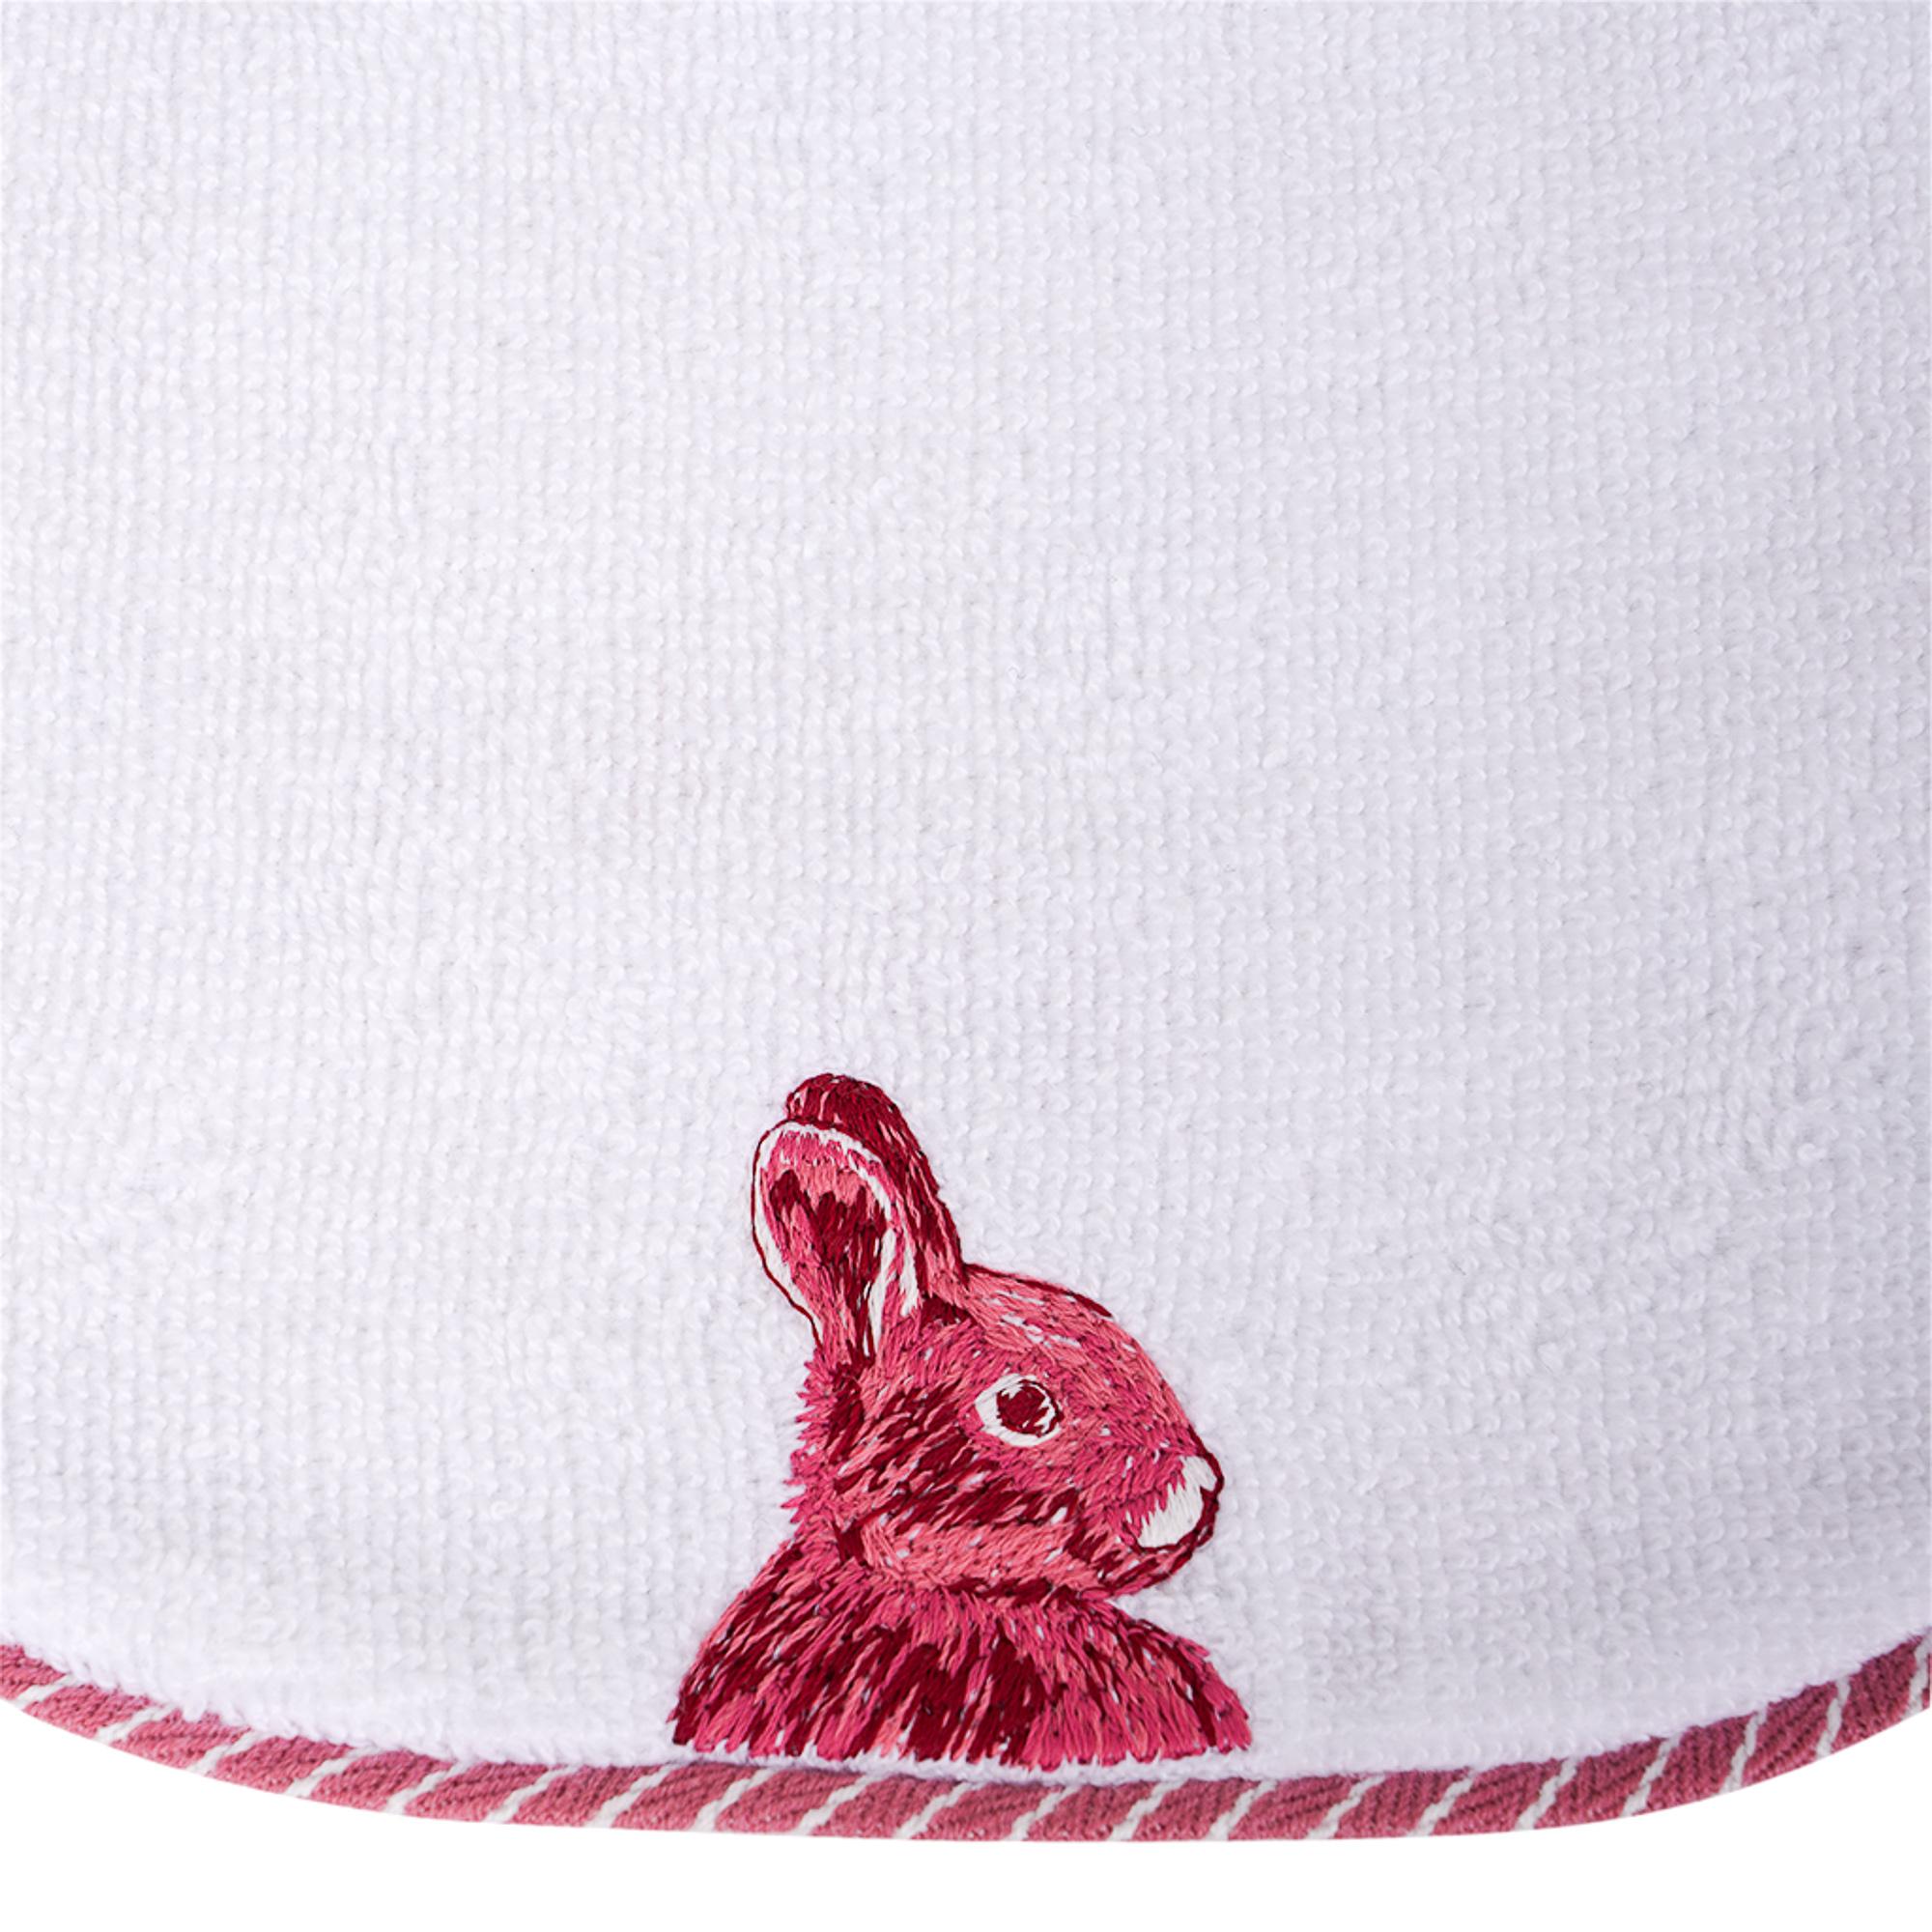 Mightychic offers an Hermes Passe-Passe Round Bib featured in Fique
This charming bib has an embroidered bunny on front.
The rear  is white cotton with splashes of pretty colours.
Lovely gift idea.
Please see the matching washcloth listed.
Clou de